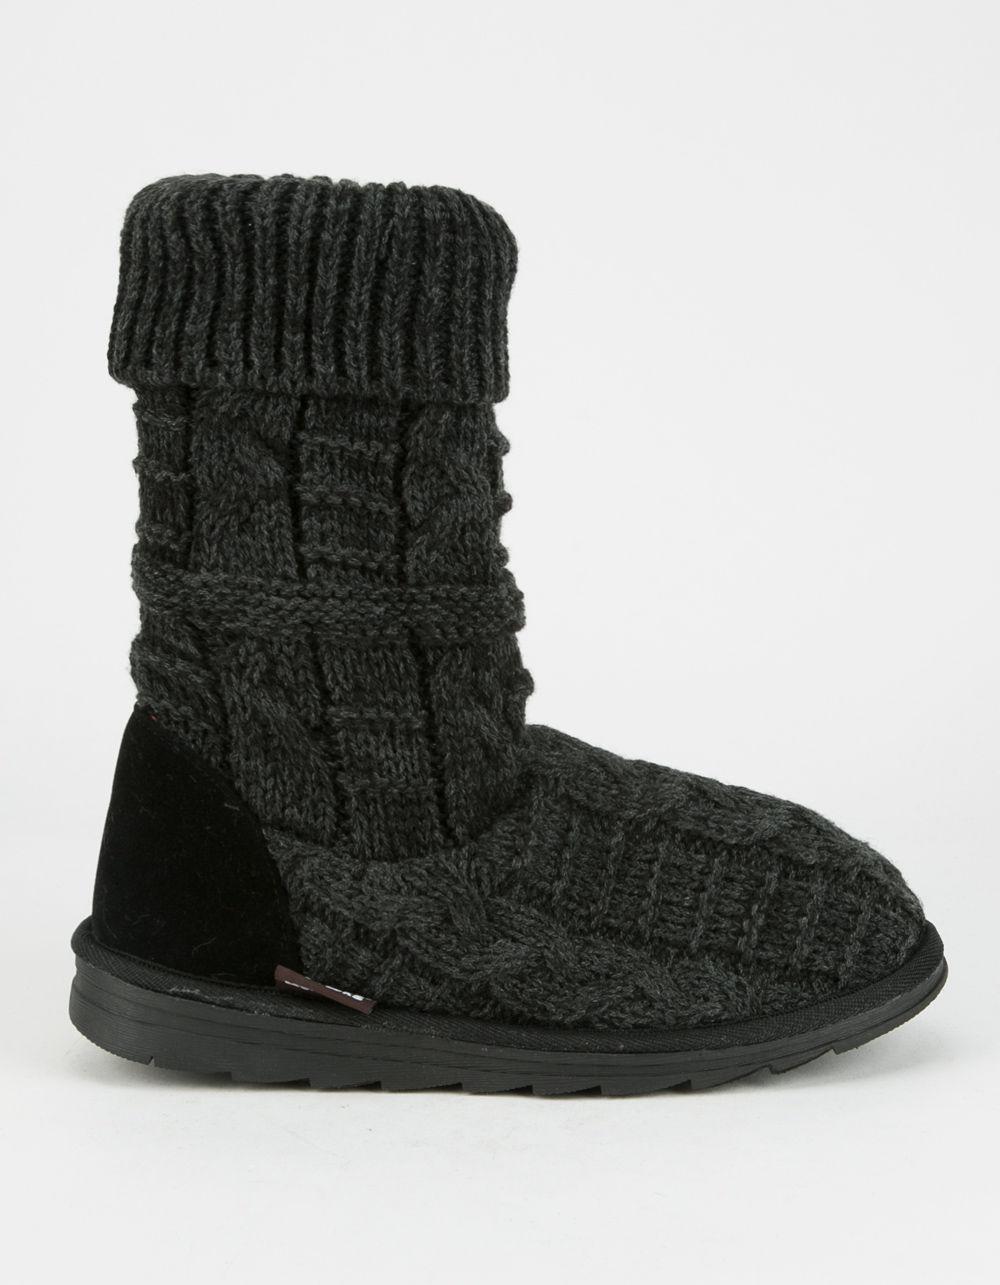 This! 10+ Hidden Facts of Black Slipper Boots! Shop for slipper boots ...